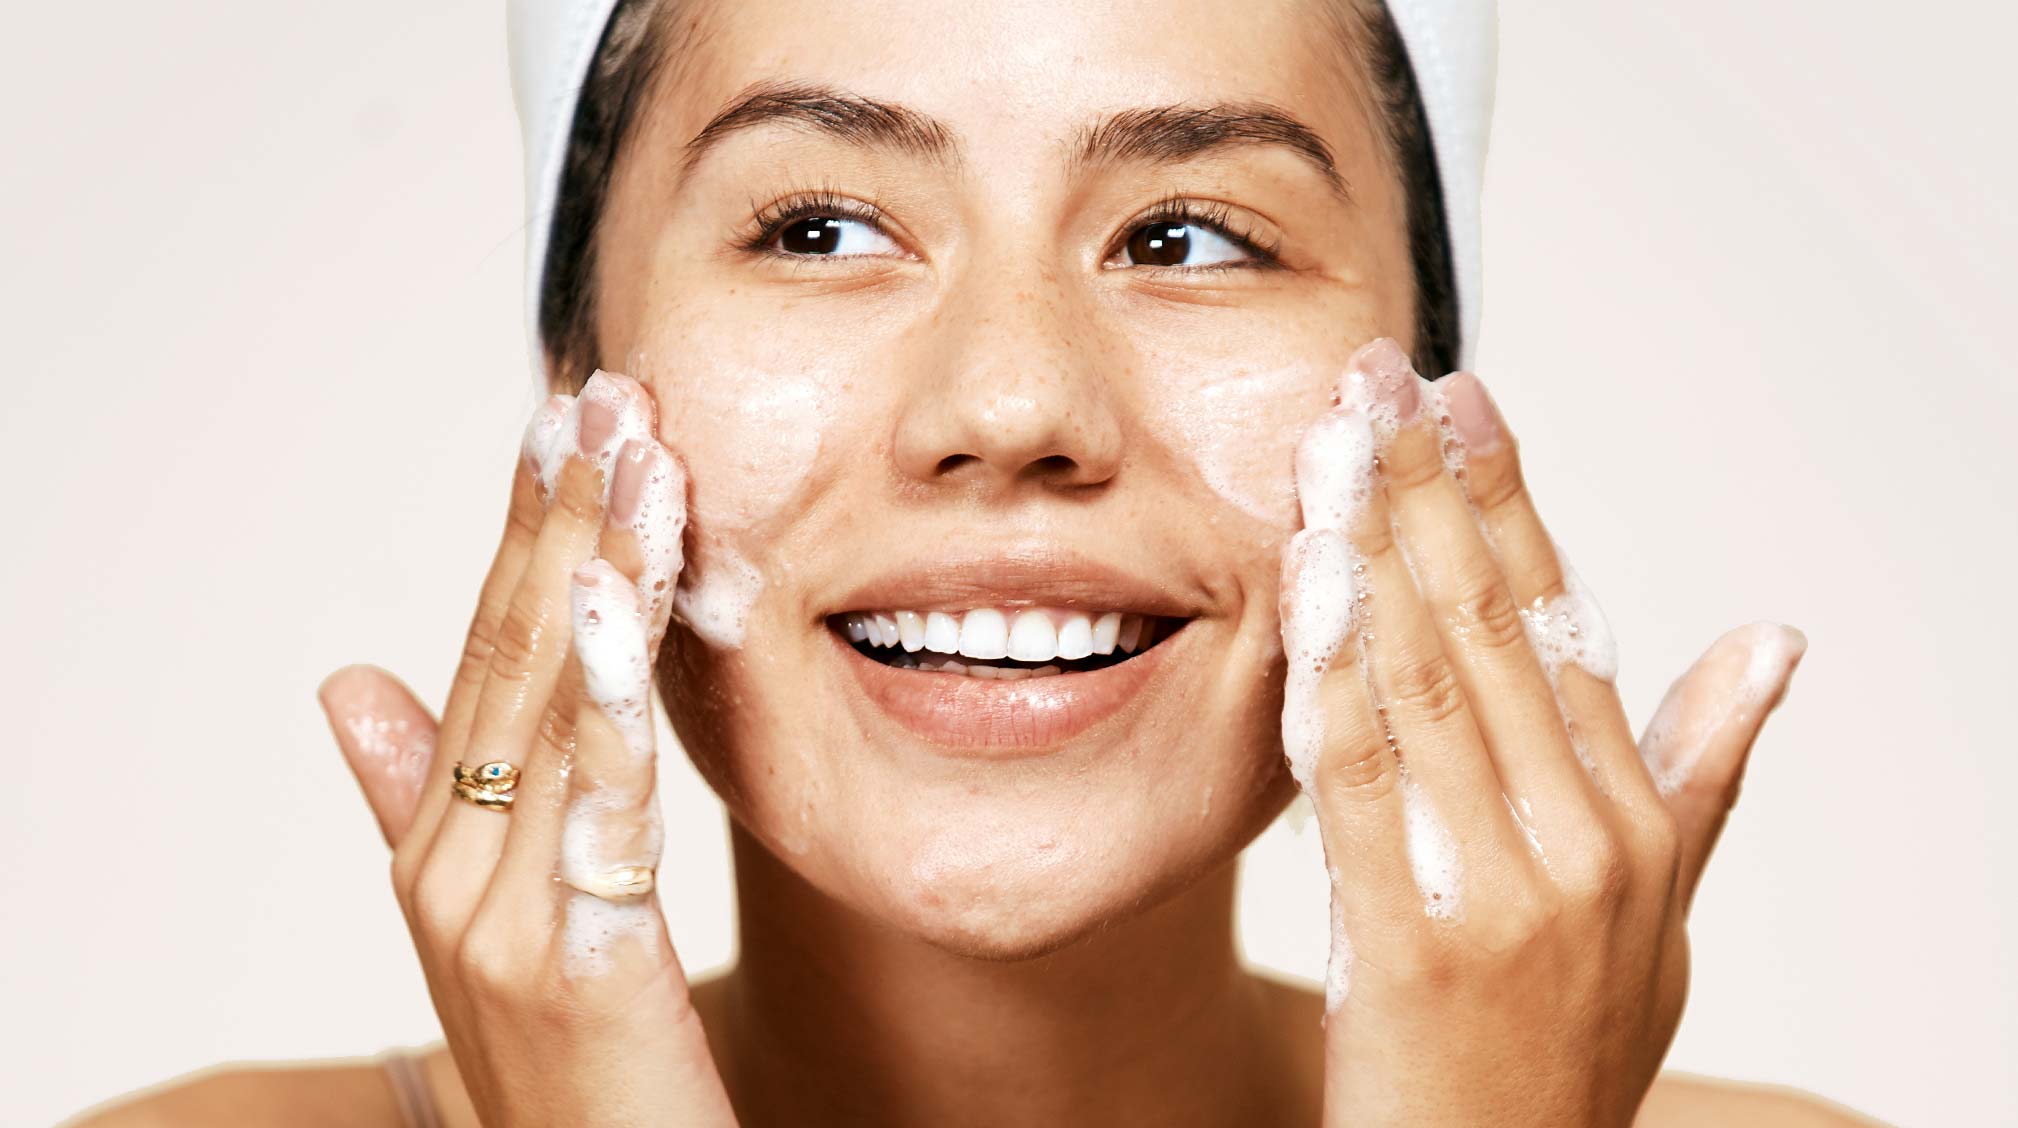 The Truth About Cleansing: 5 Face-Washing Myths, Debunked